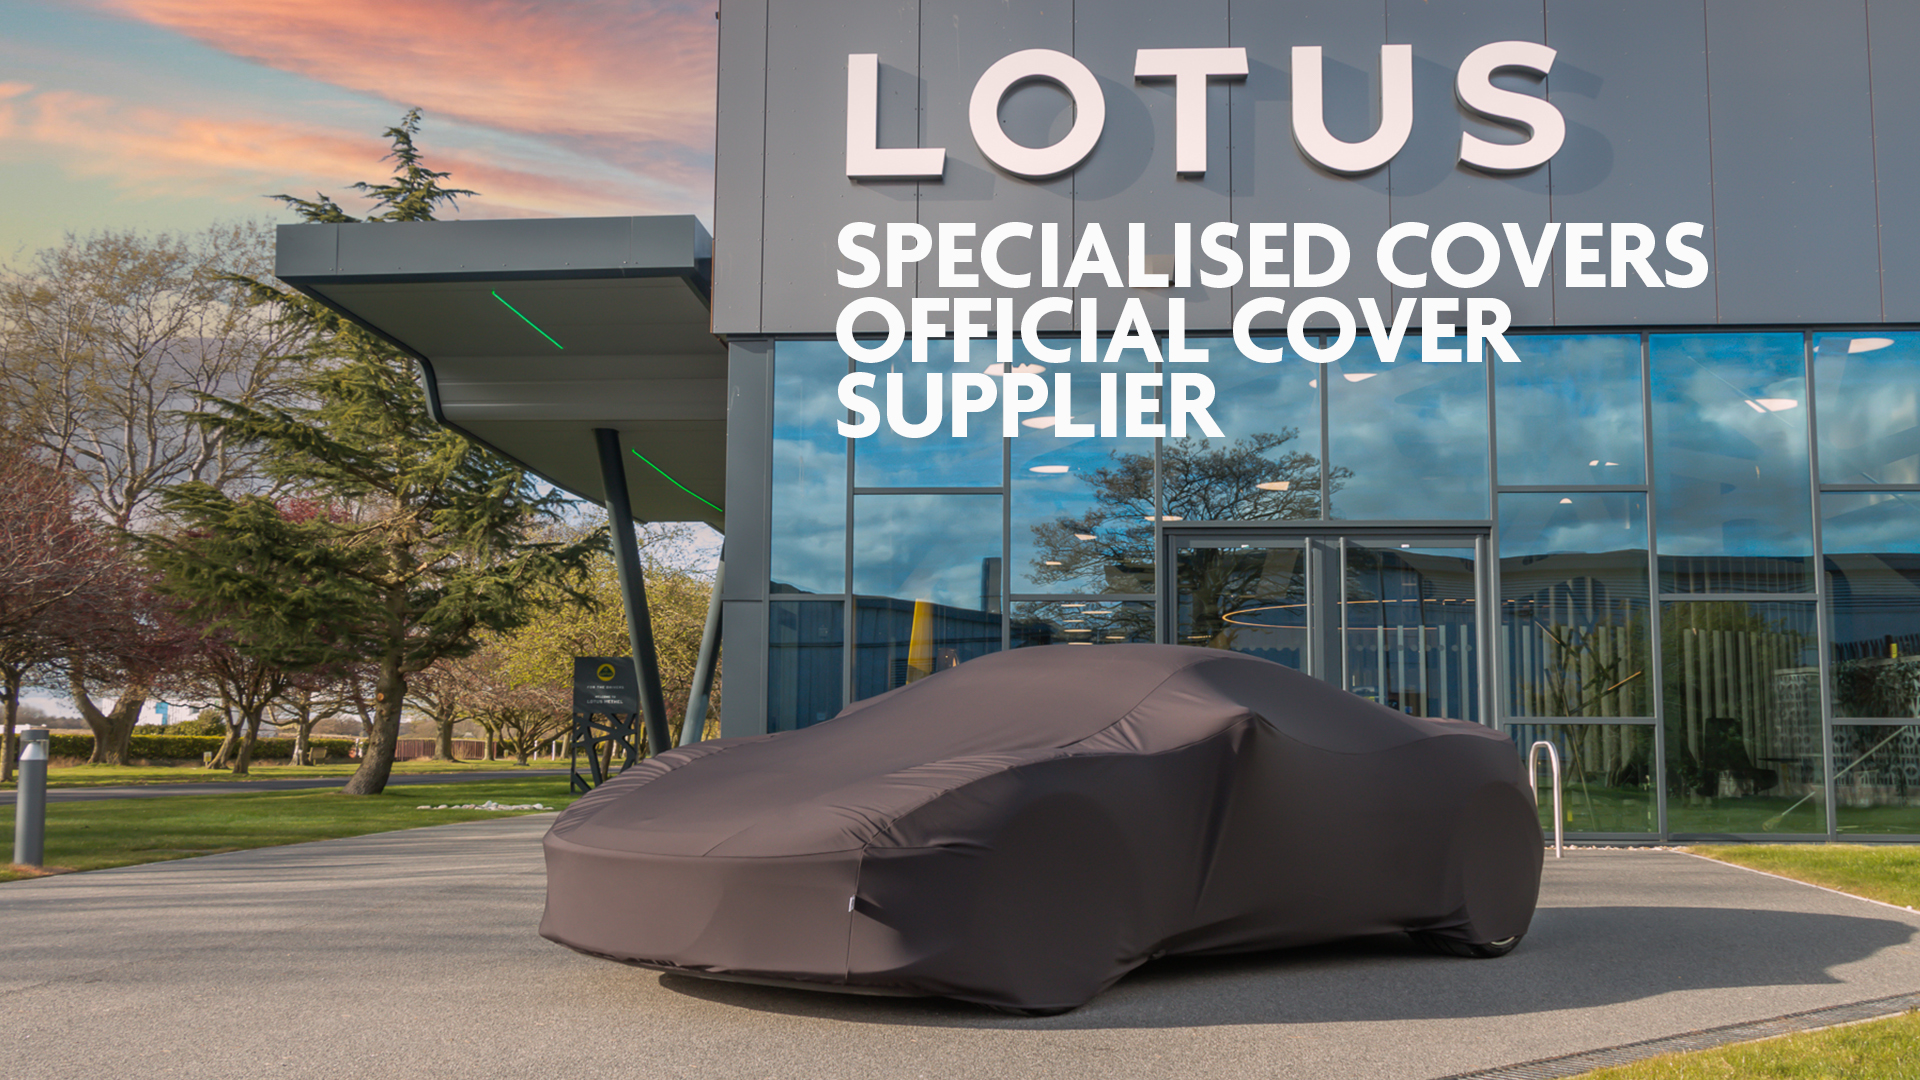 Specialised Covers and Lotus partnership 